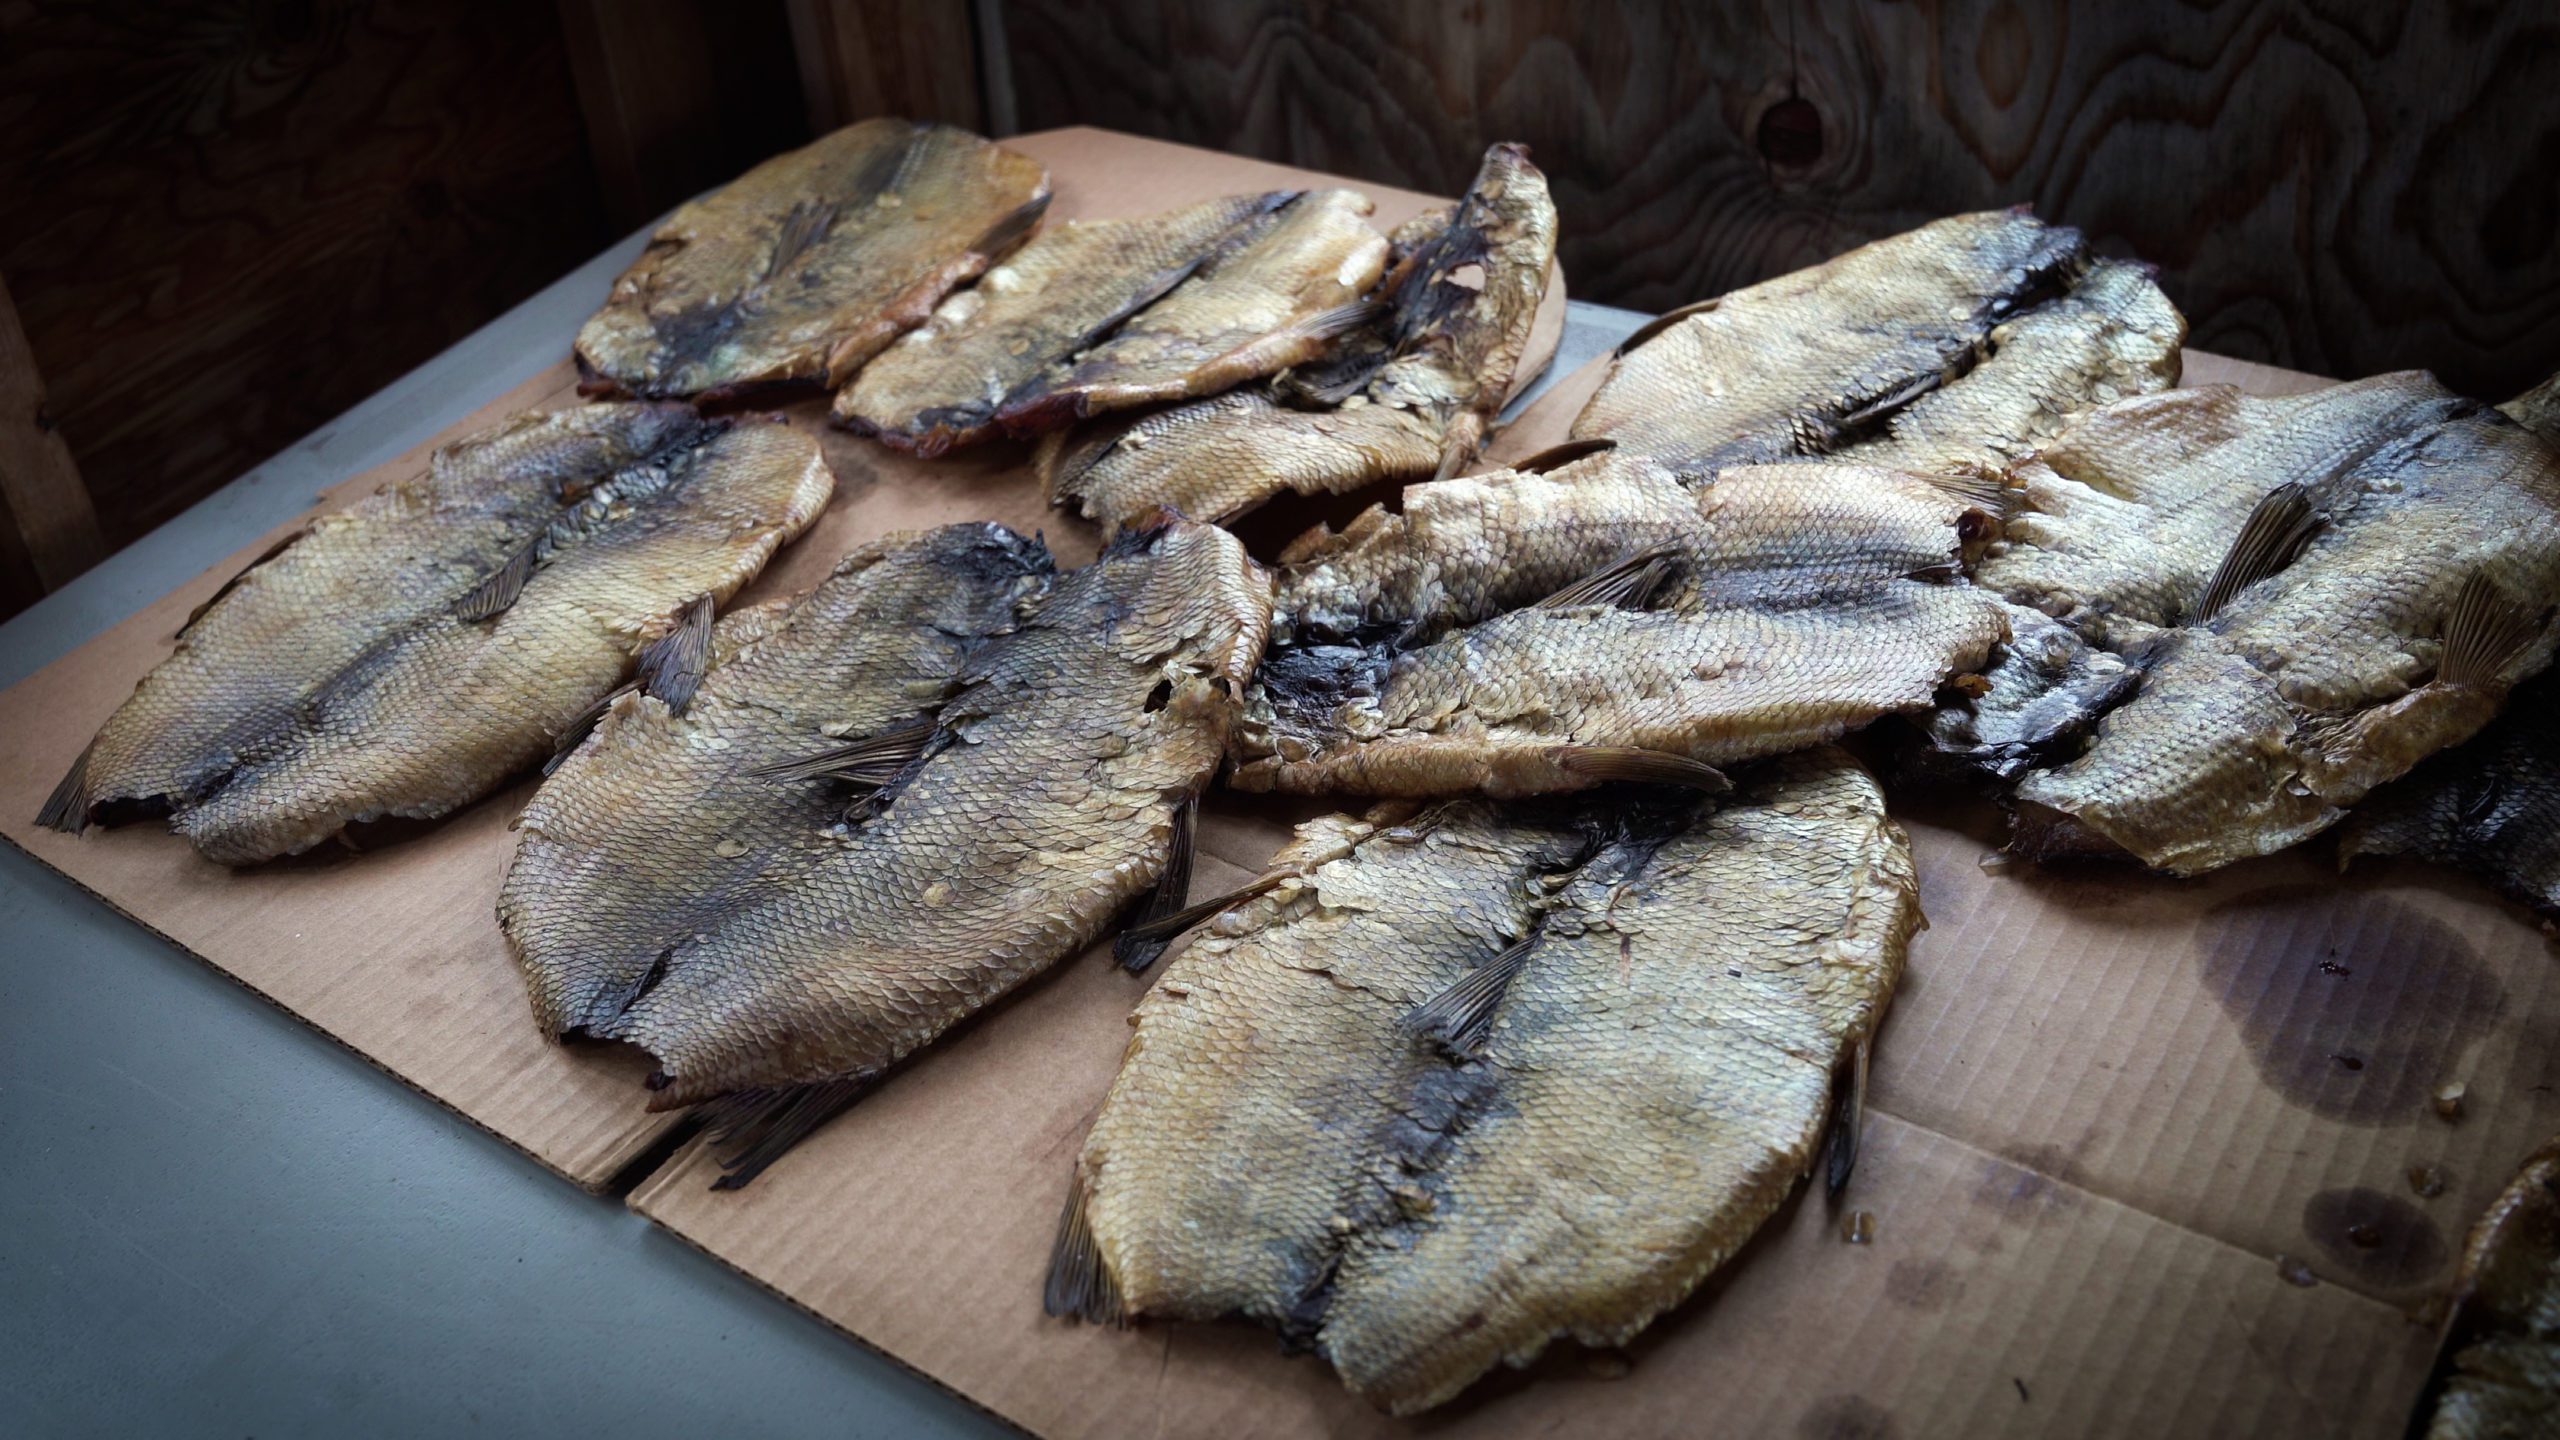 There was dry fish available for community members throughout the week.